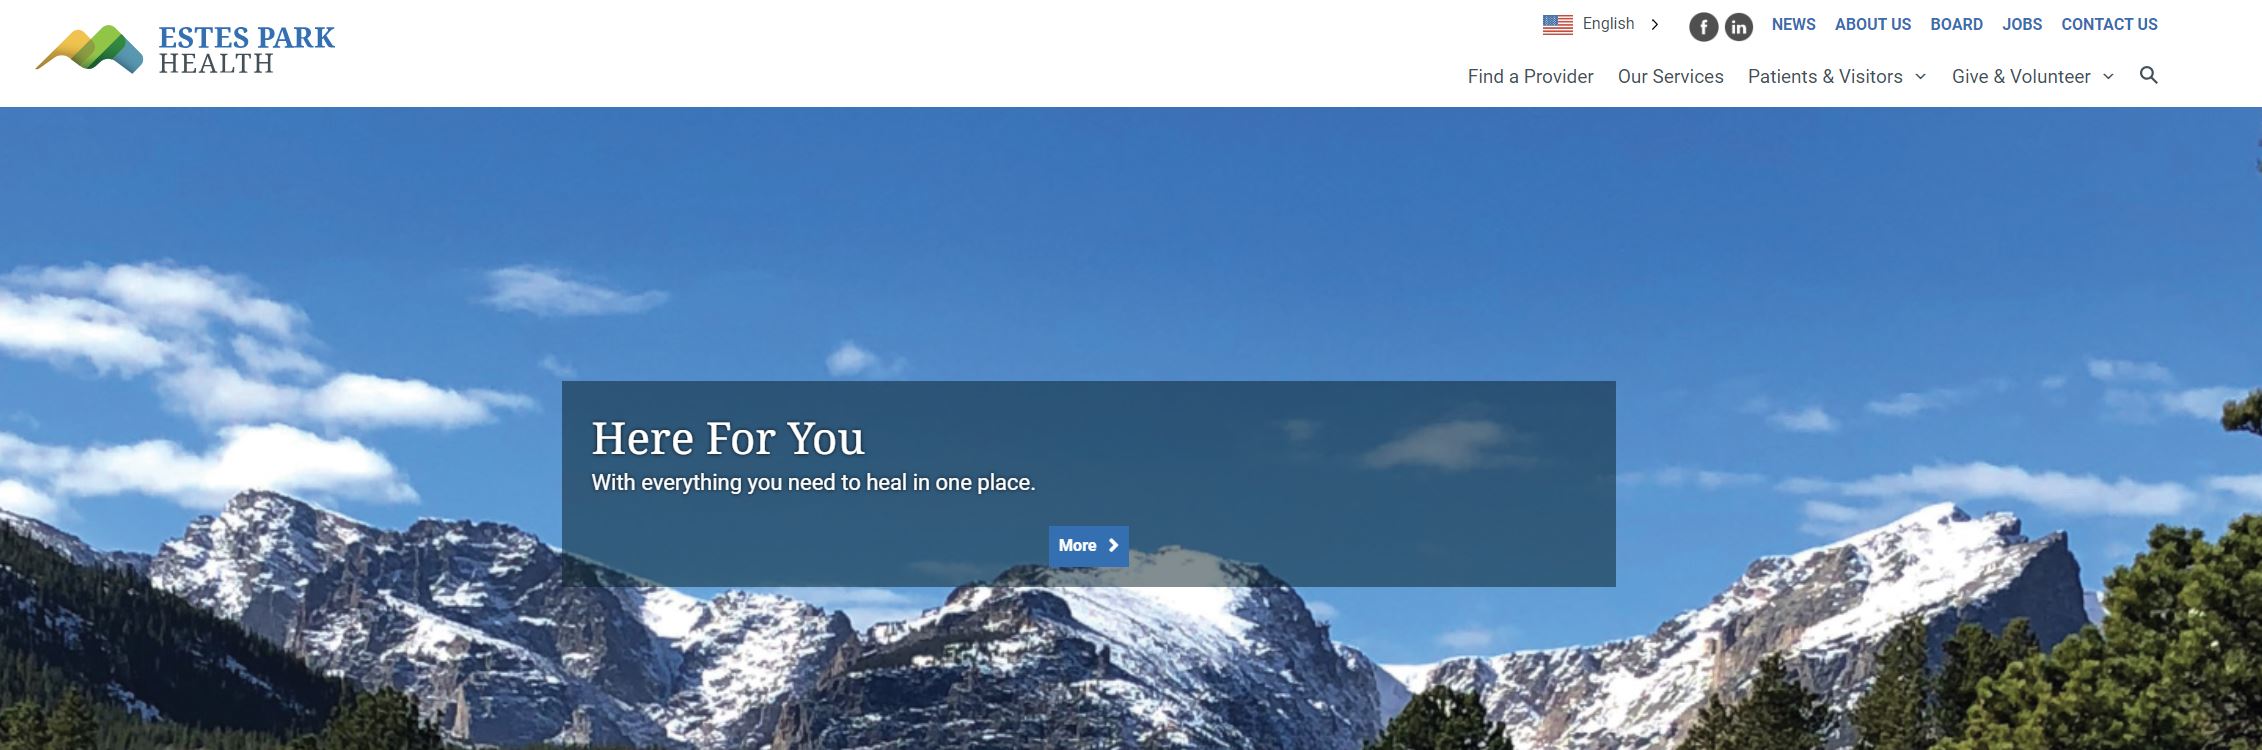 Website header for Estes Park Health featuring a mountain range background and a banner reading 